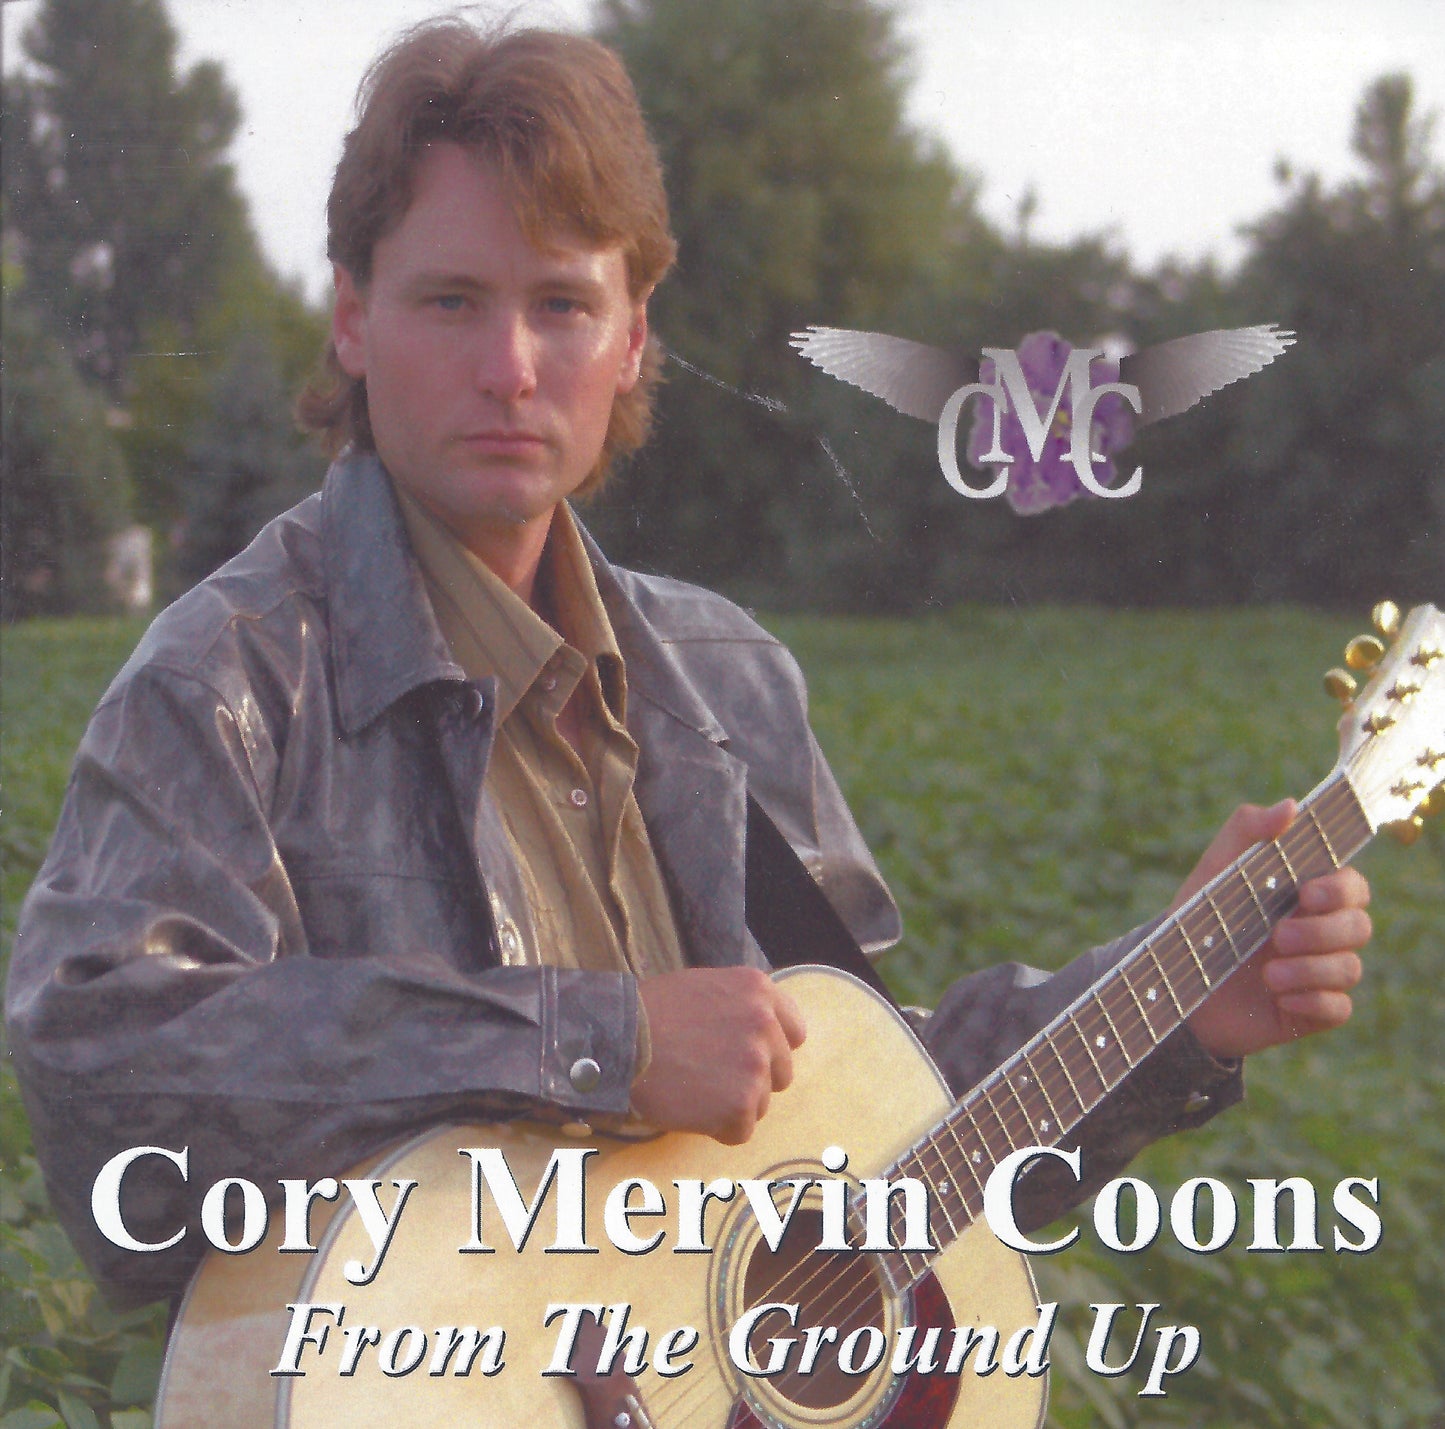 Spanish Dream In Paradise - Cory Mervin Coons